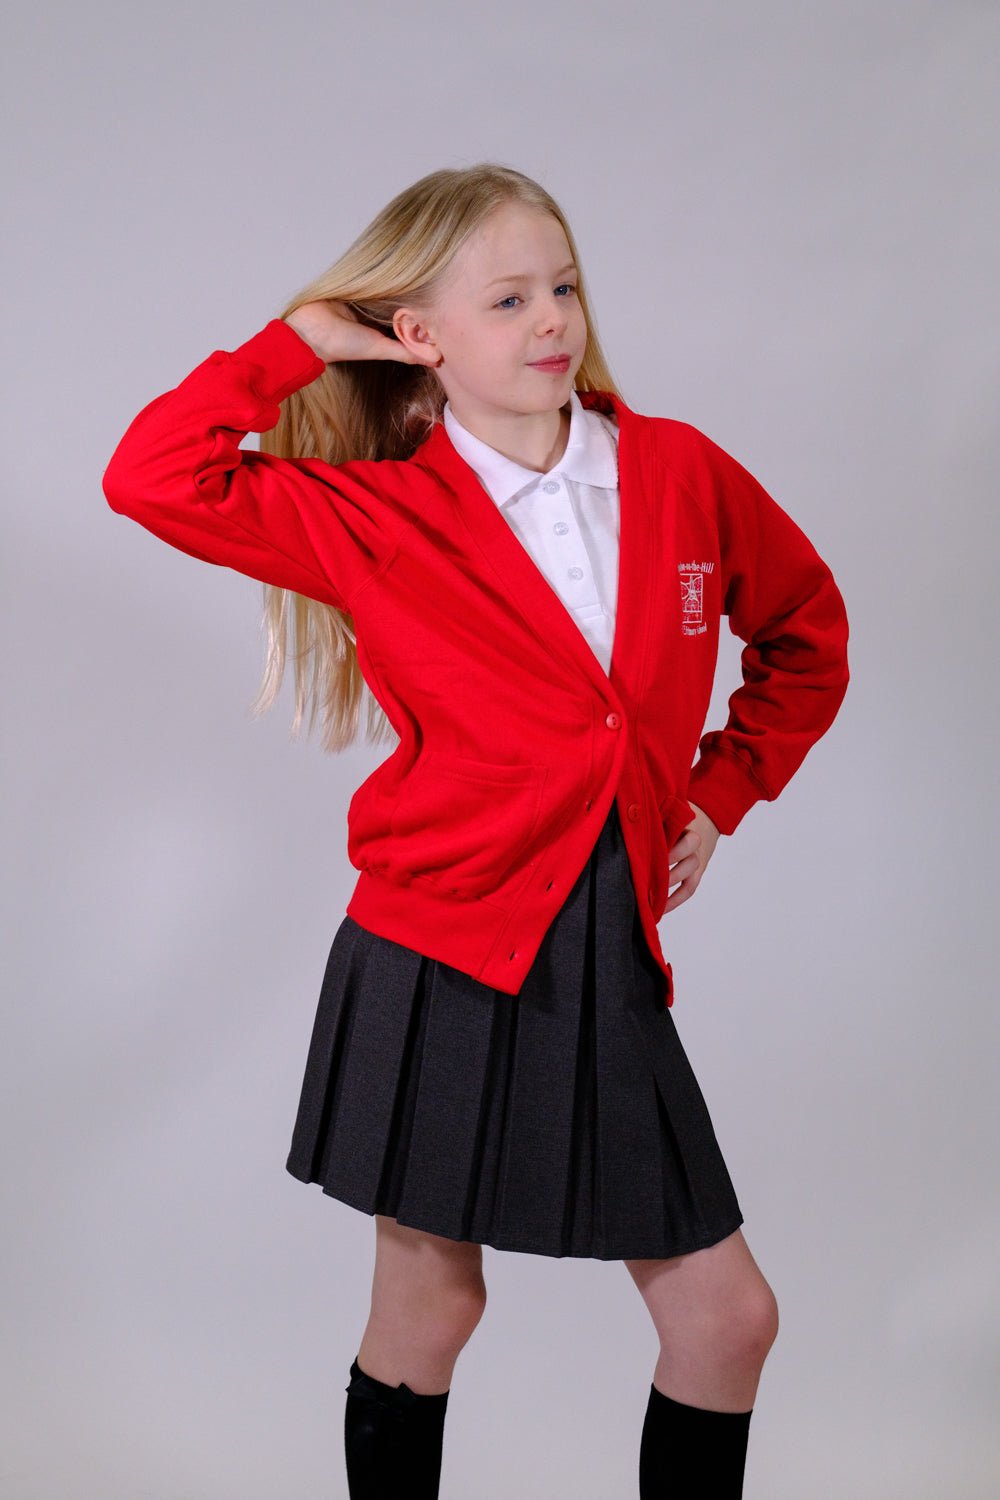 Horndon-on-the-Hill Frilly Polo - Uniformwise Schoolwear